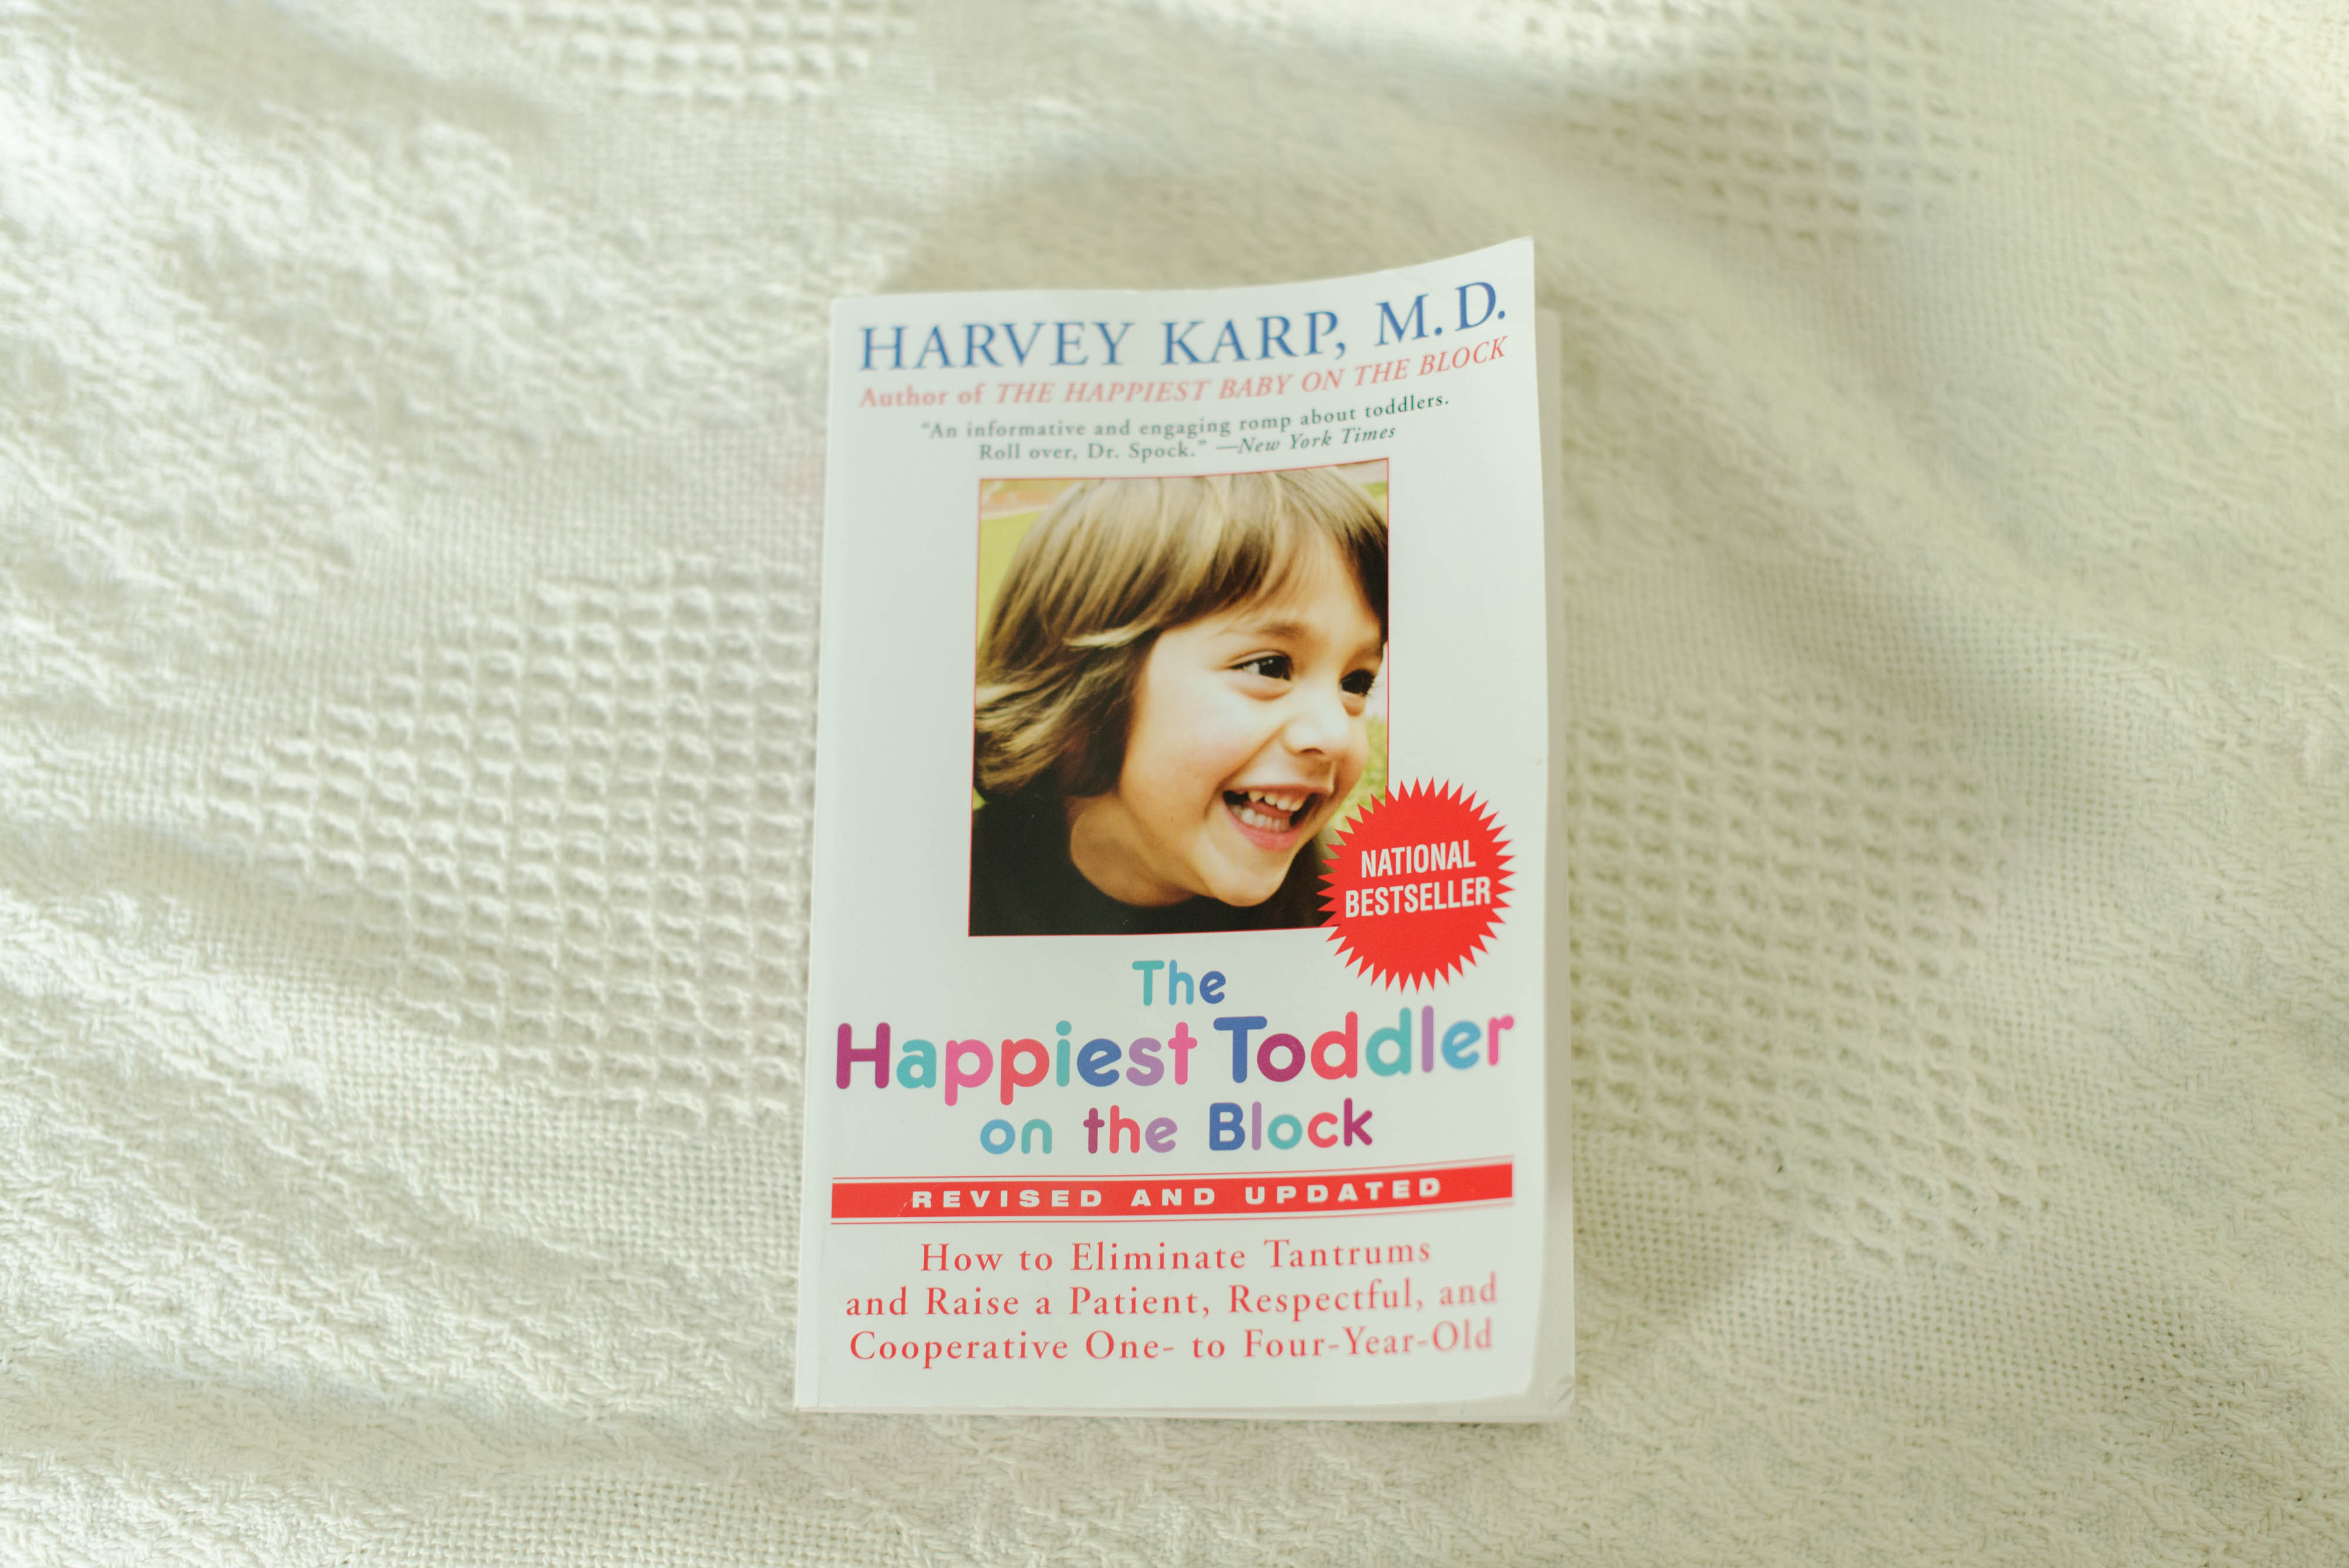 Happiest toddler on the block book review. Strategies to stop tantrums with your toddler!